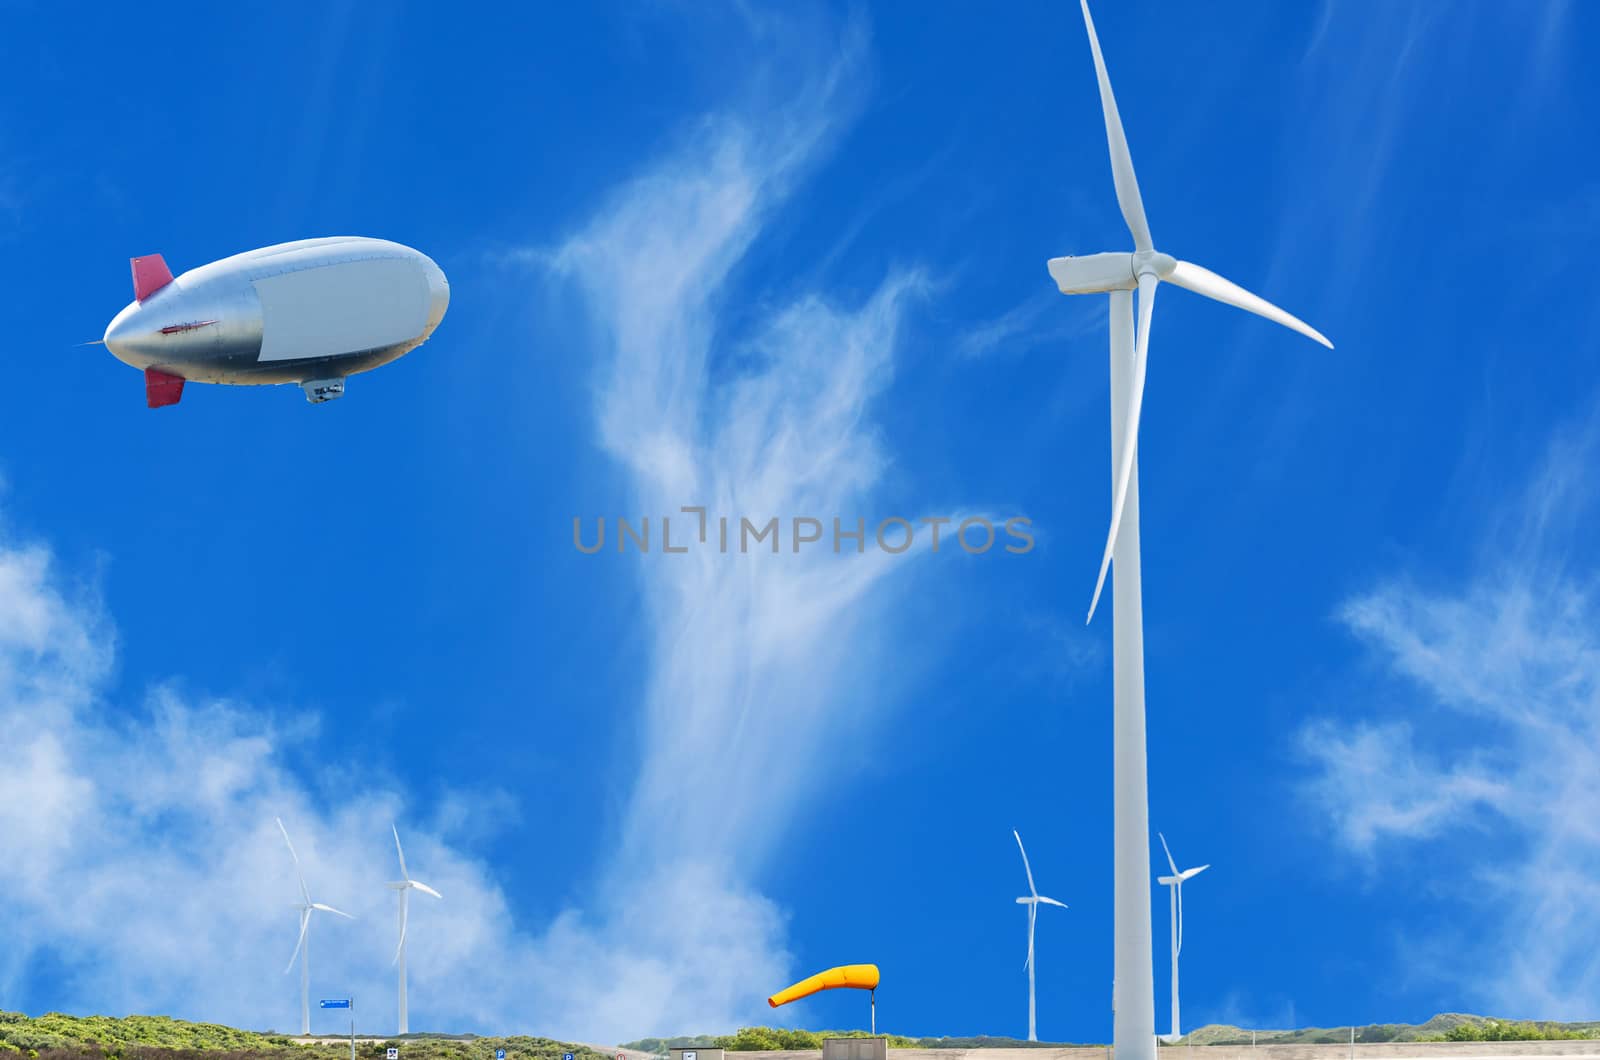 Airship, Zeppelin and wind power plant    by JFsPic